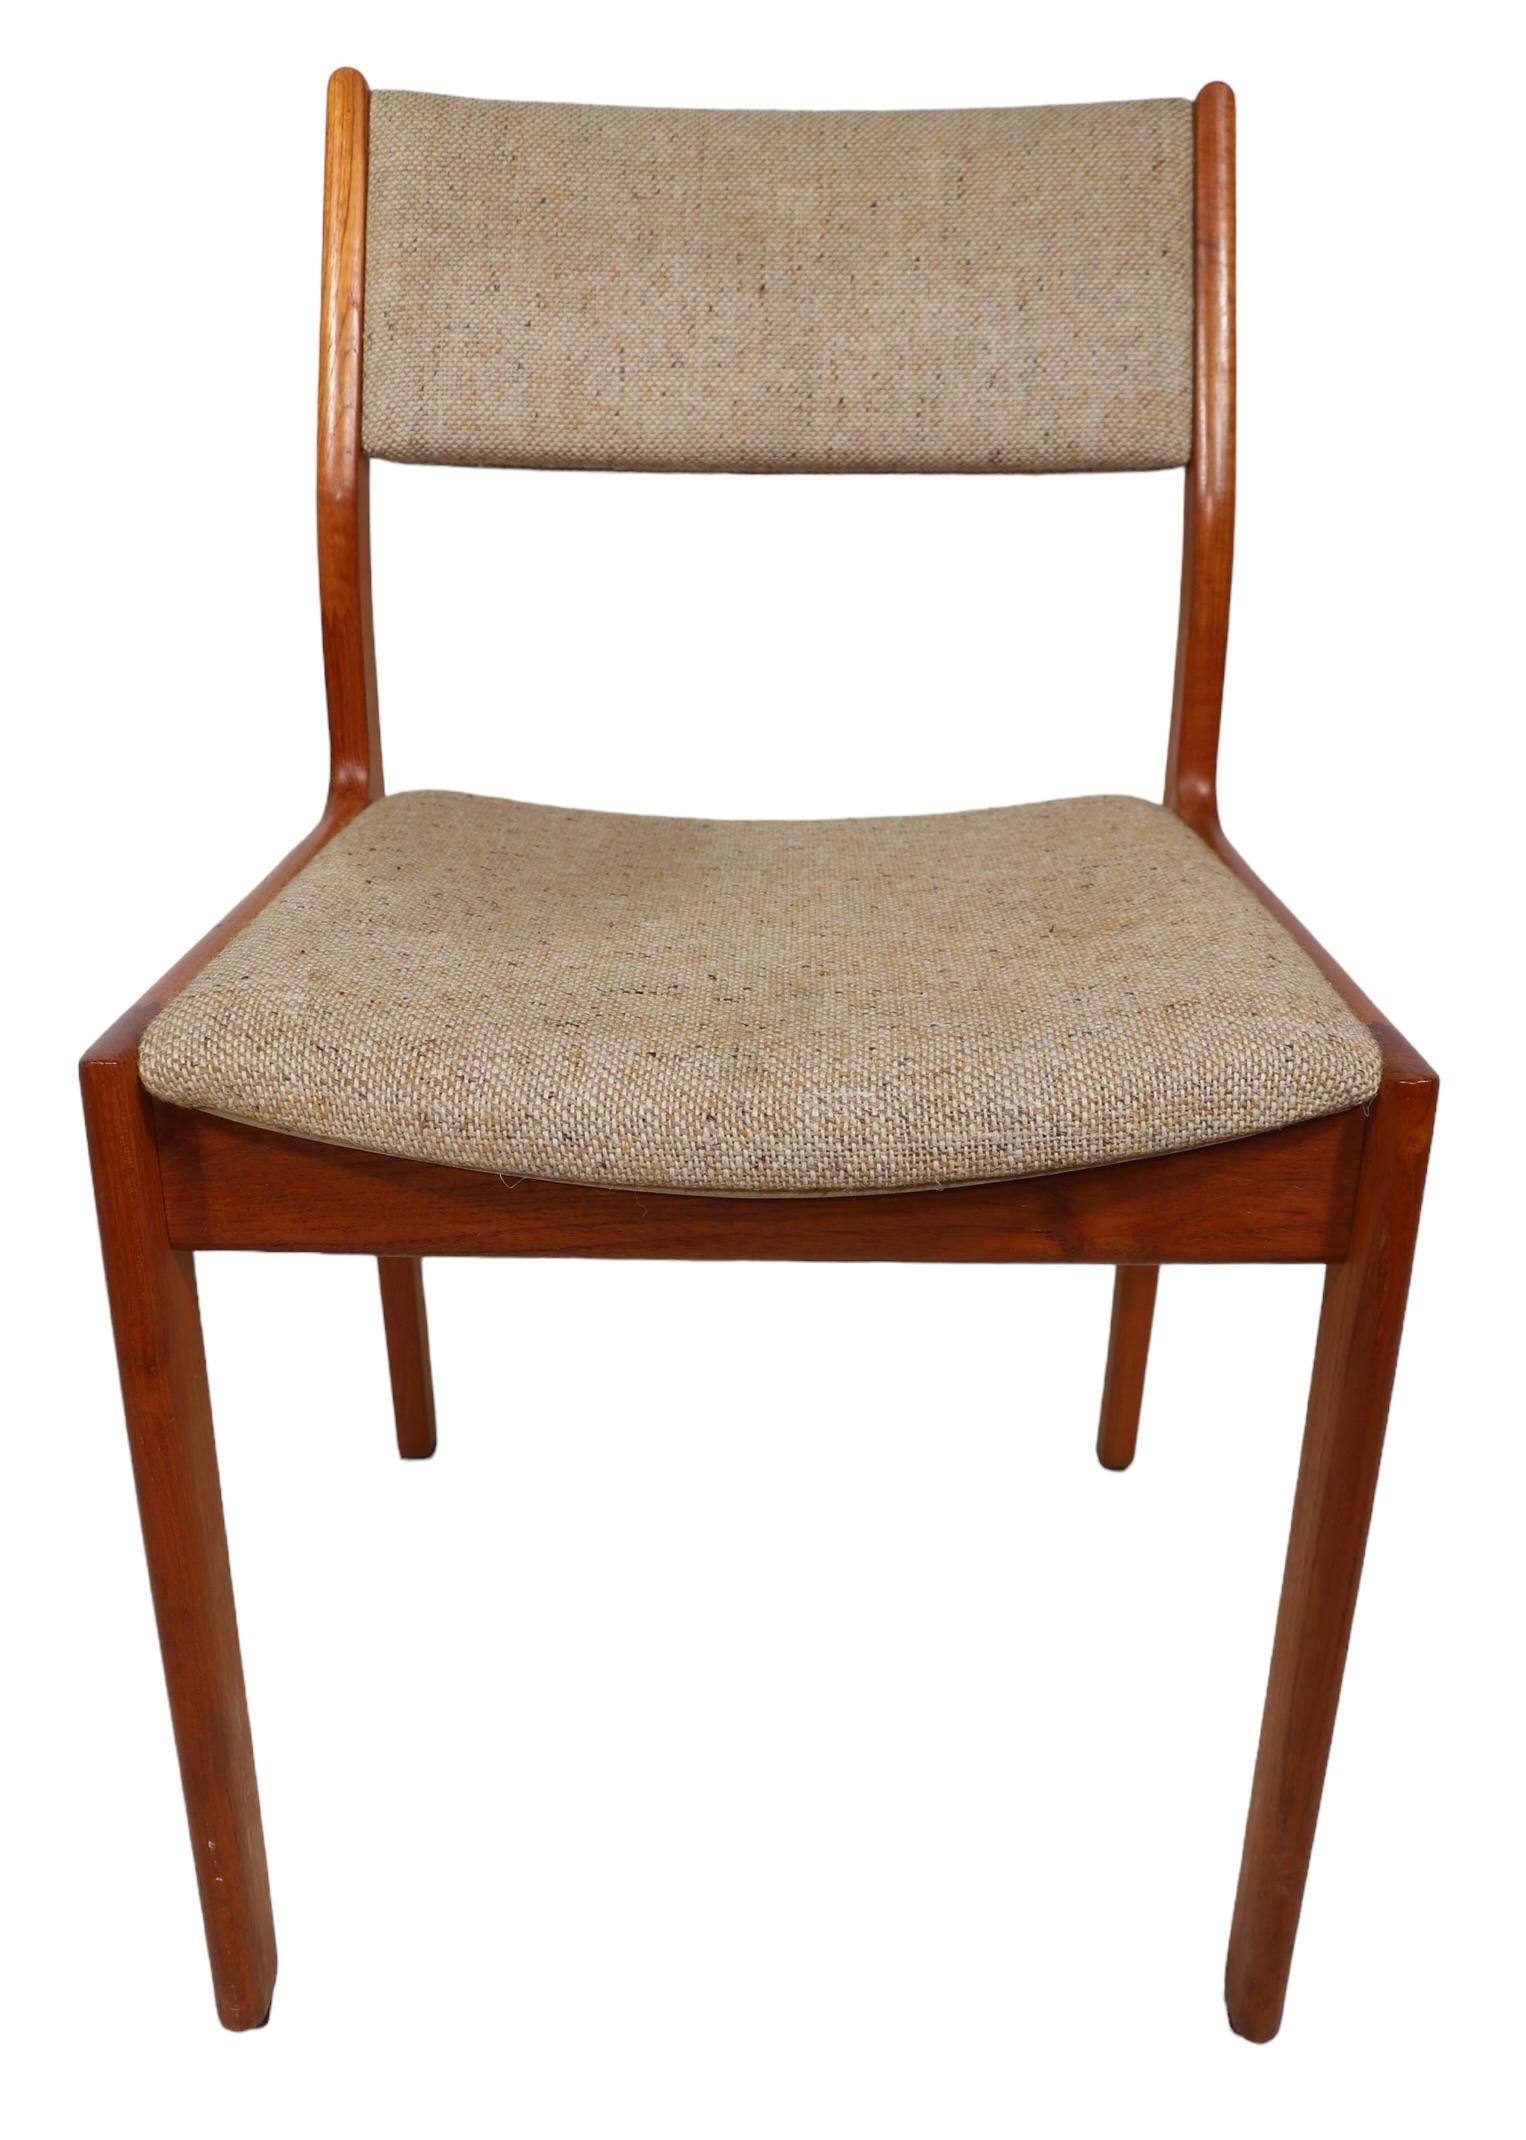 Four Teak  Danish Style Mid Century Dining Chairs by D Scan c 1950/1960's  For Sale 3